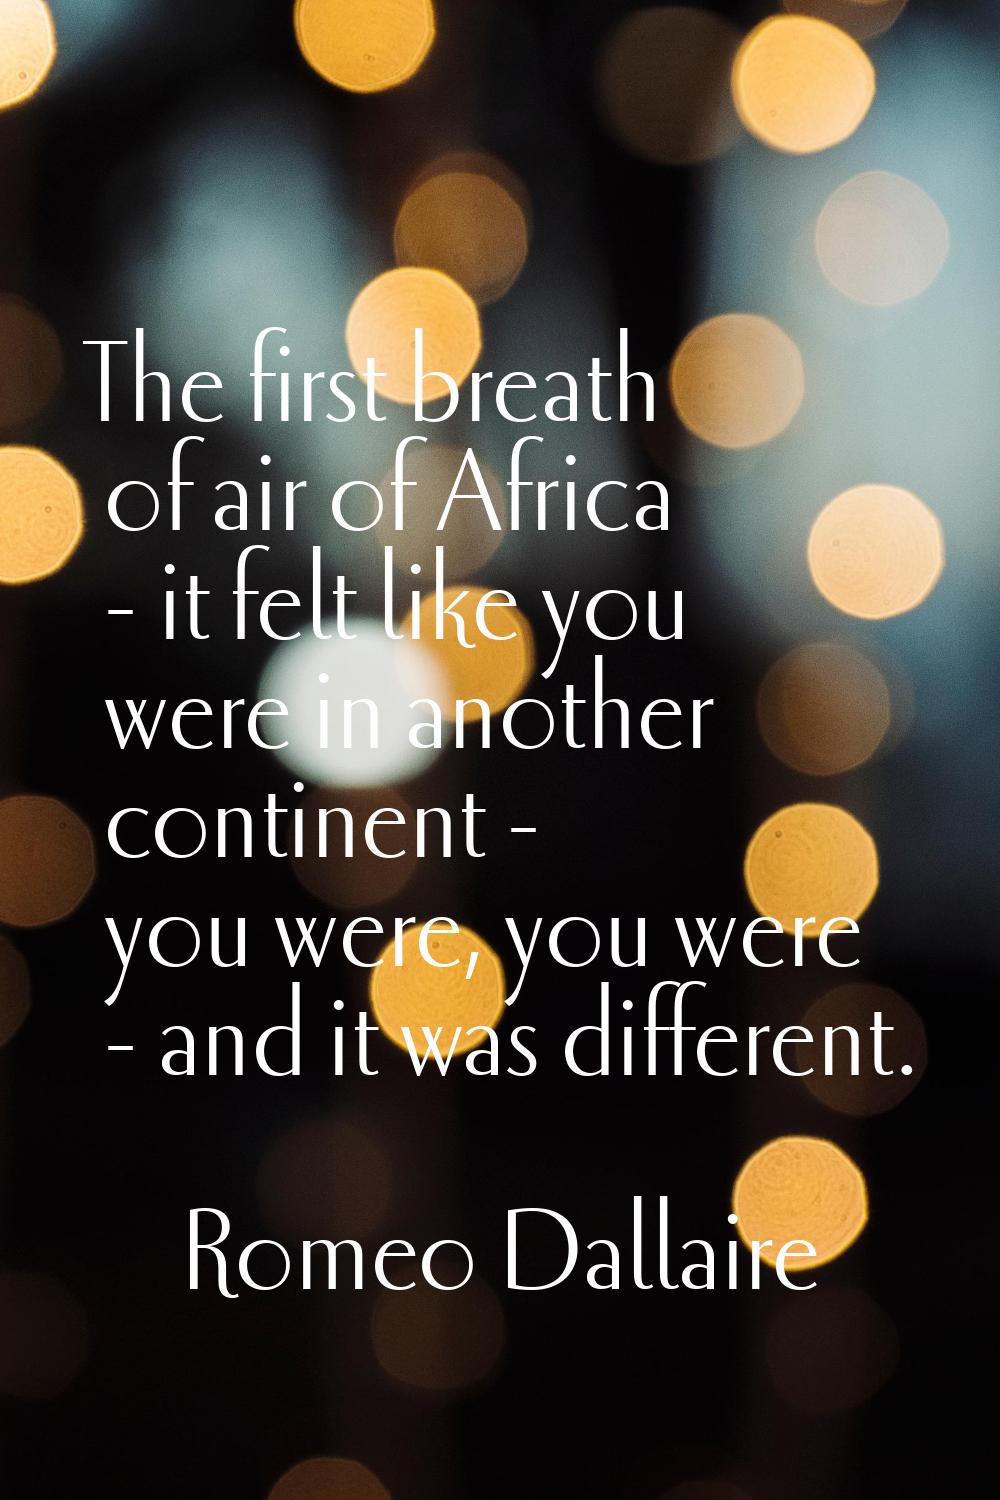 The first breath of air of Africa - it felt like you were in another continent - you were, you were